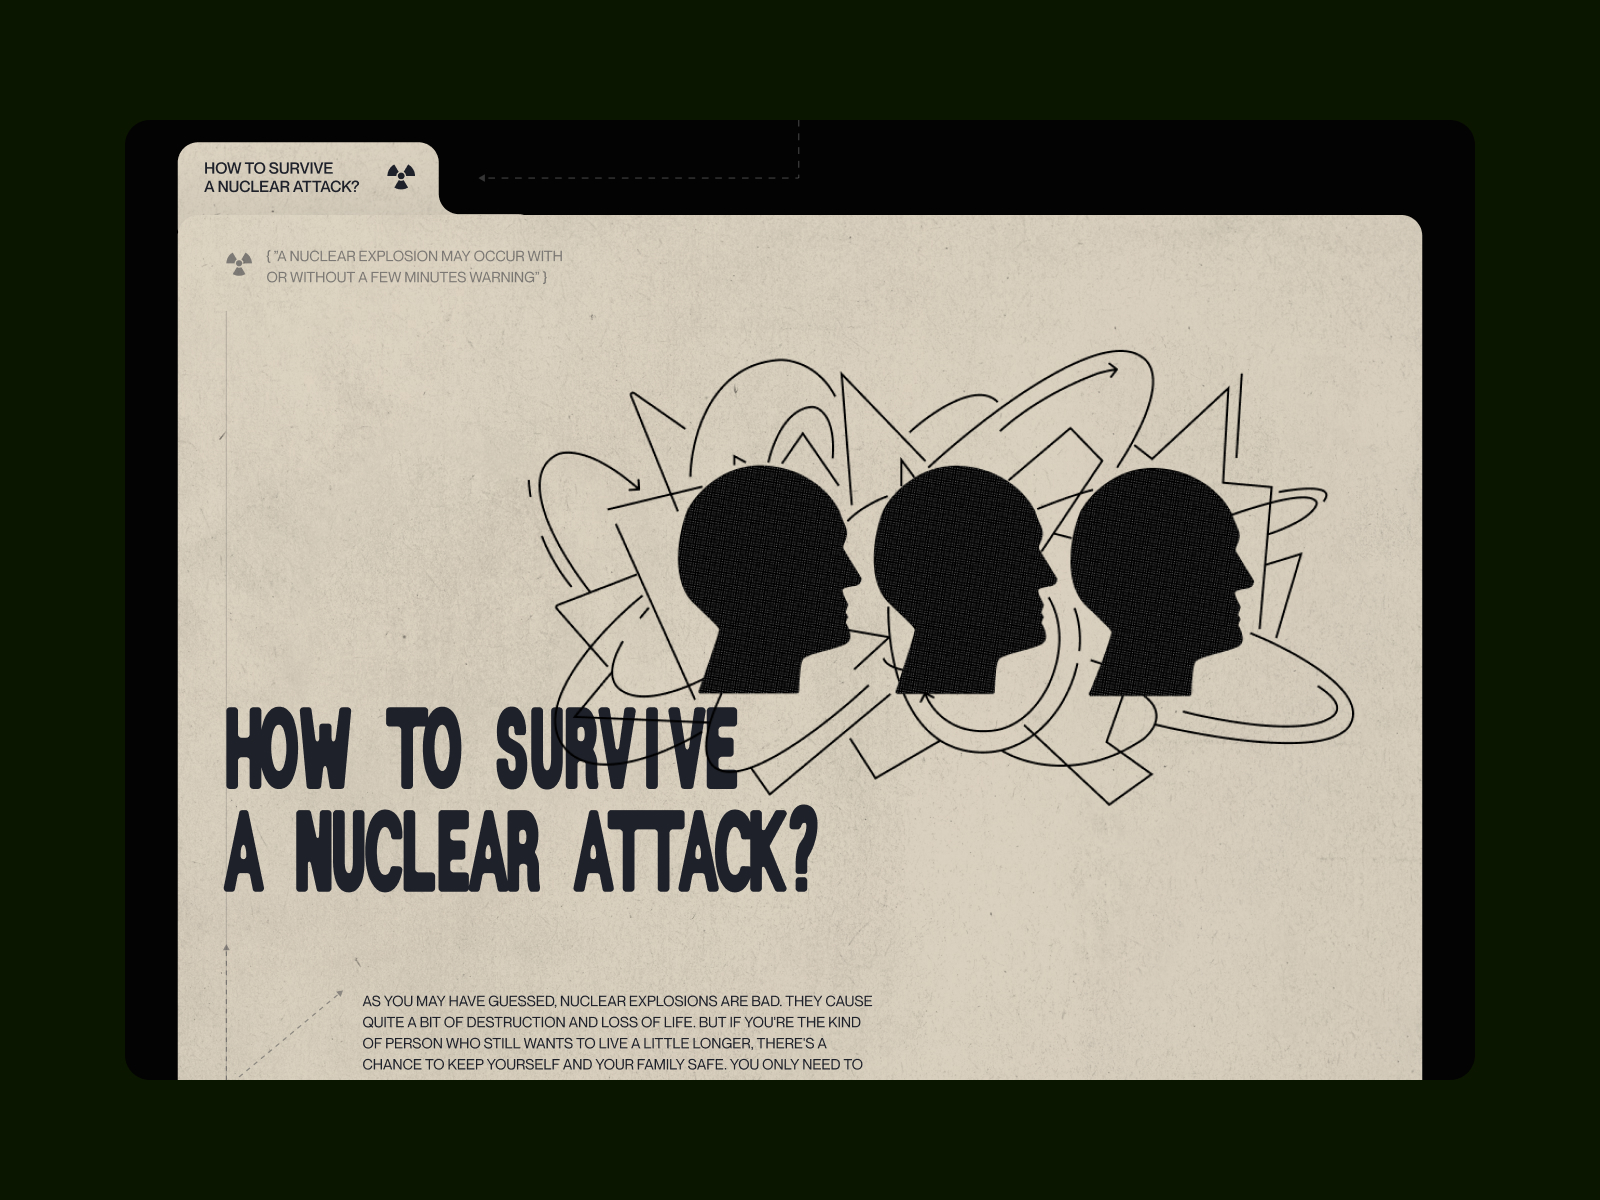 How to survive a nuclear attack?